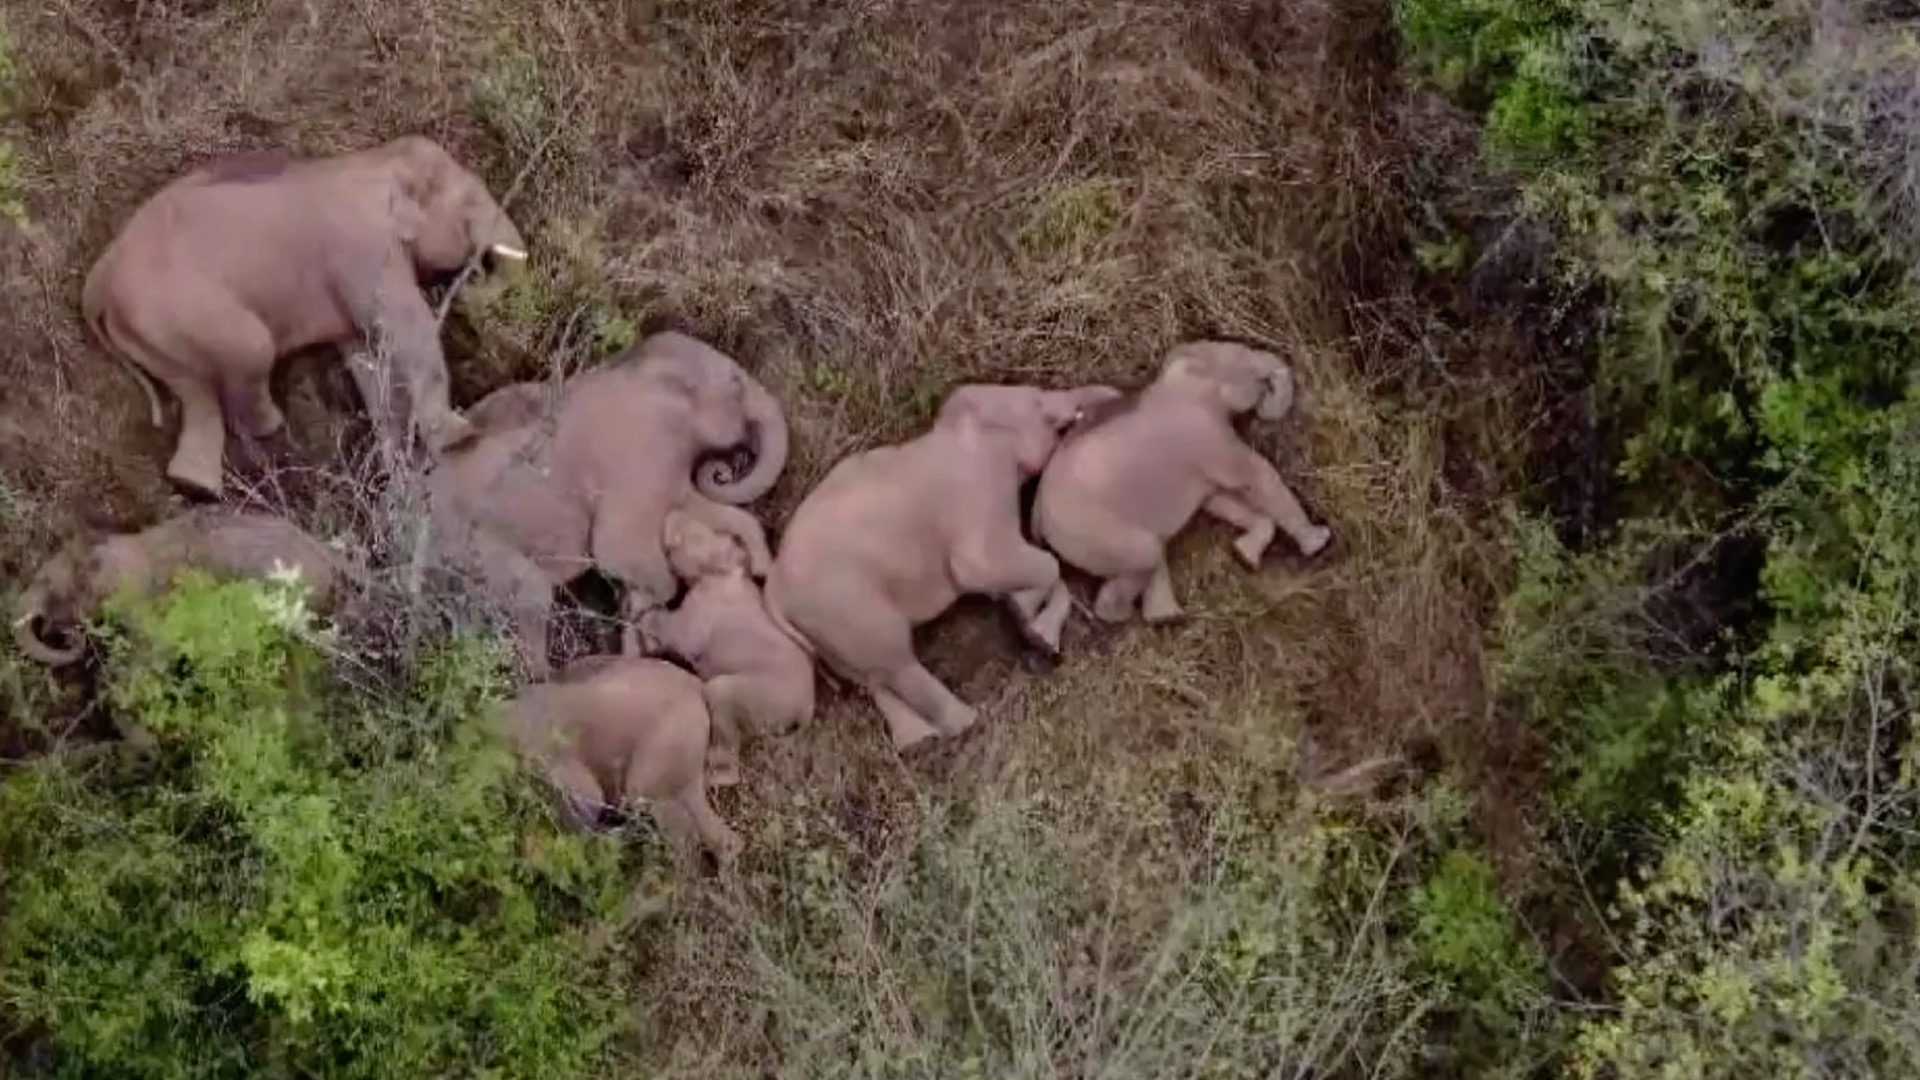 Drone footage shows wandering elephants asleep lying down in a group